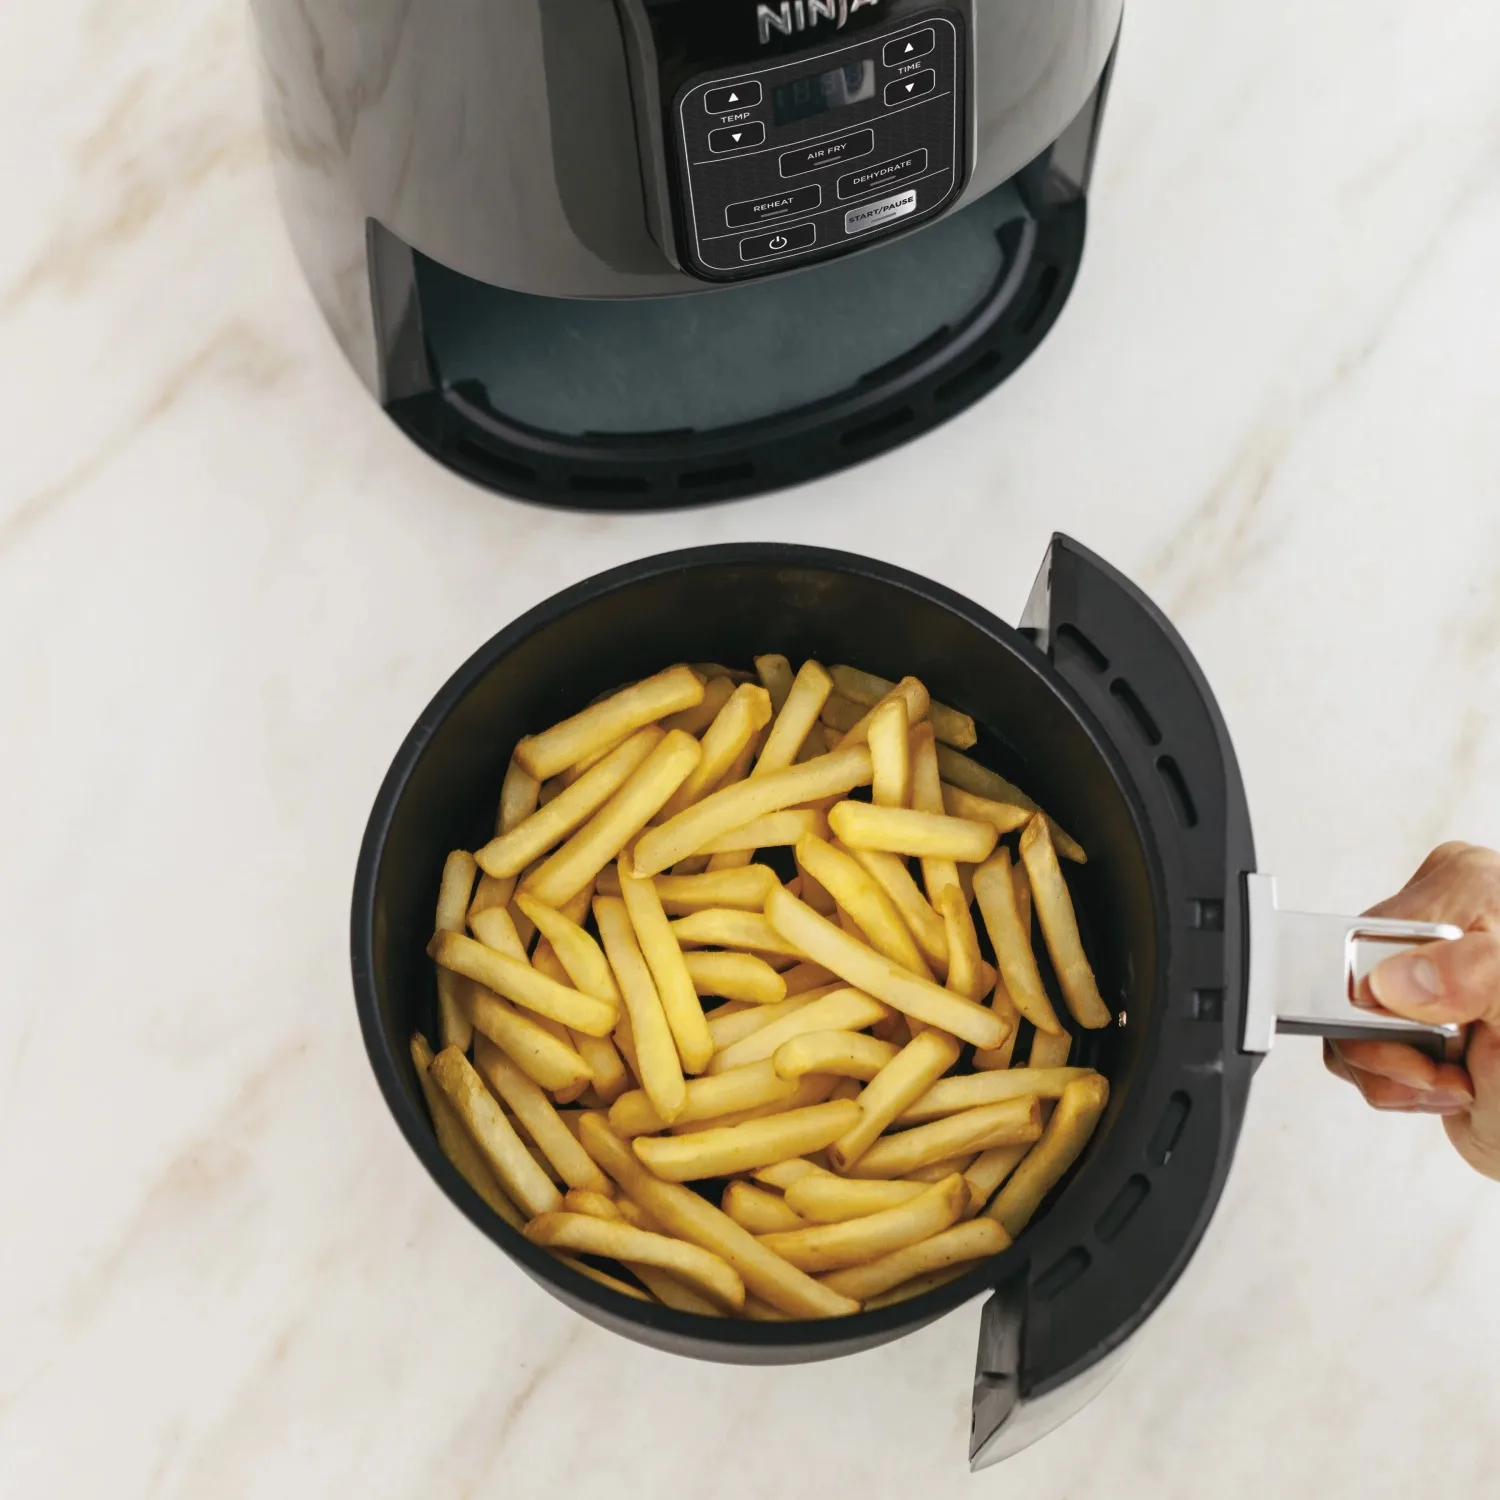 Air Fryer Ceramic-coated Nonstick Basket and Crisper Plate Fit 2 Lbs of  French Fries 4QT